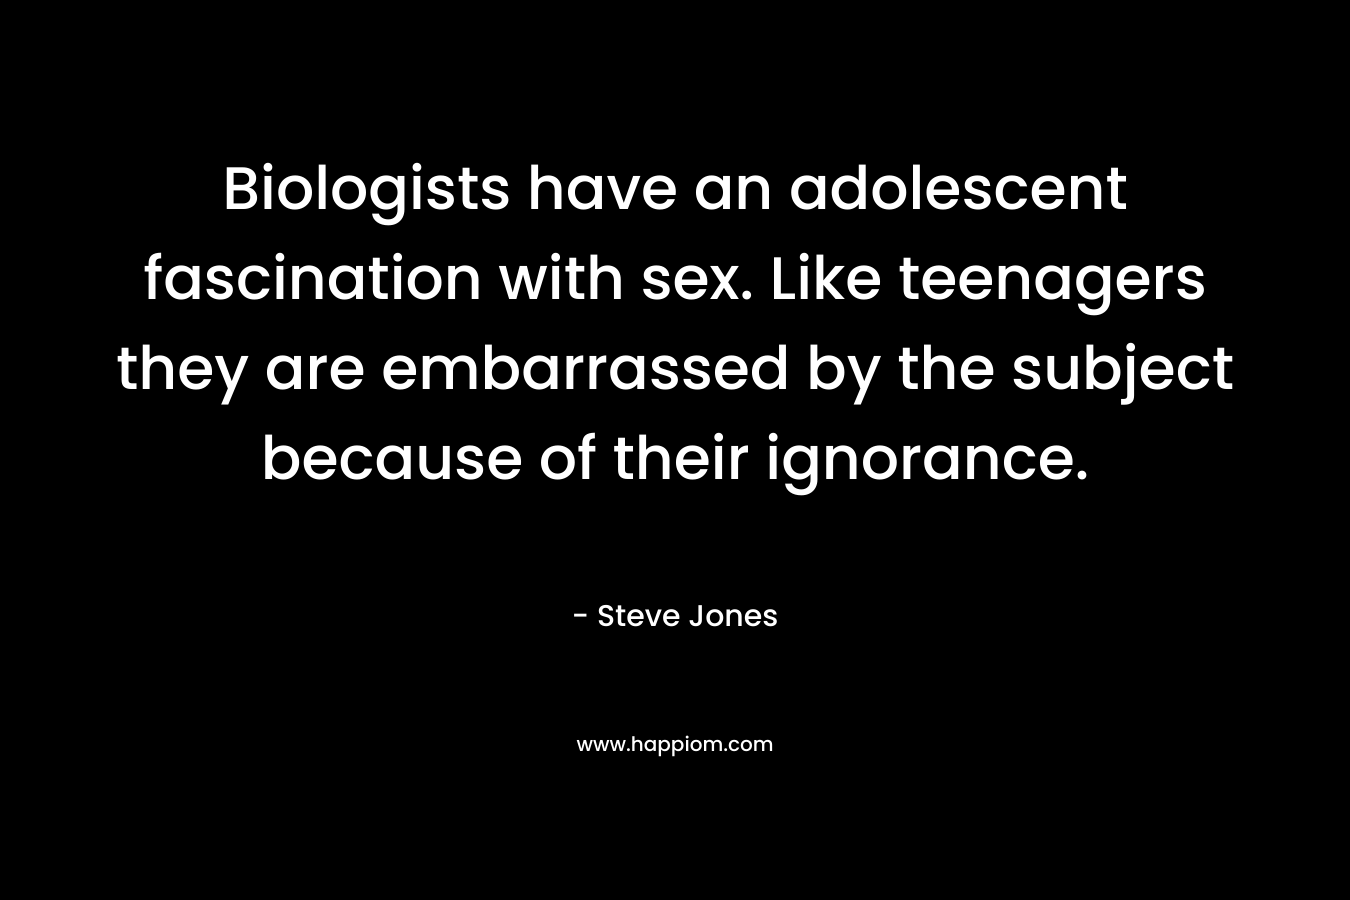 Biologists have an adolescent fascination with sex. Like teenagers they are embarrassed by the subject because of their ignorance. – Steve Jones